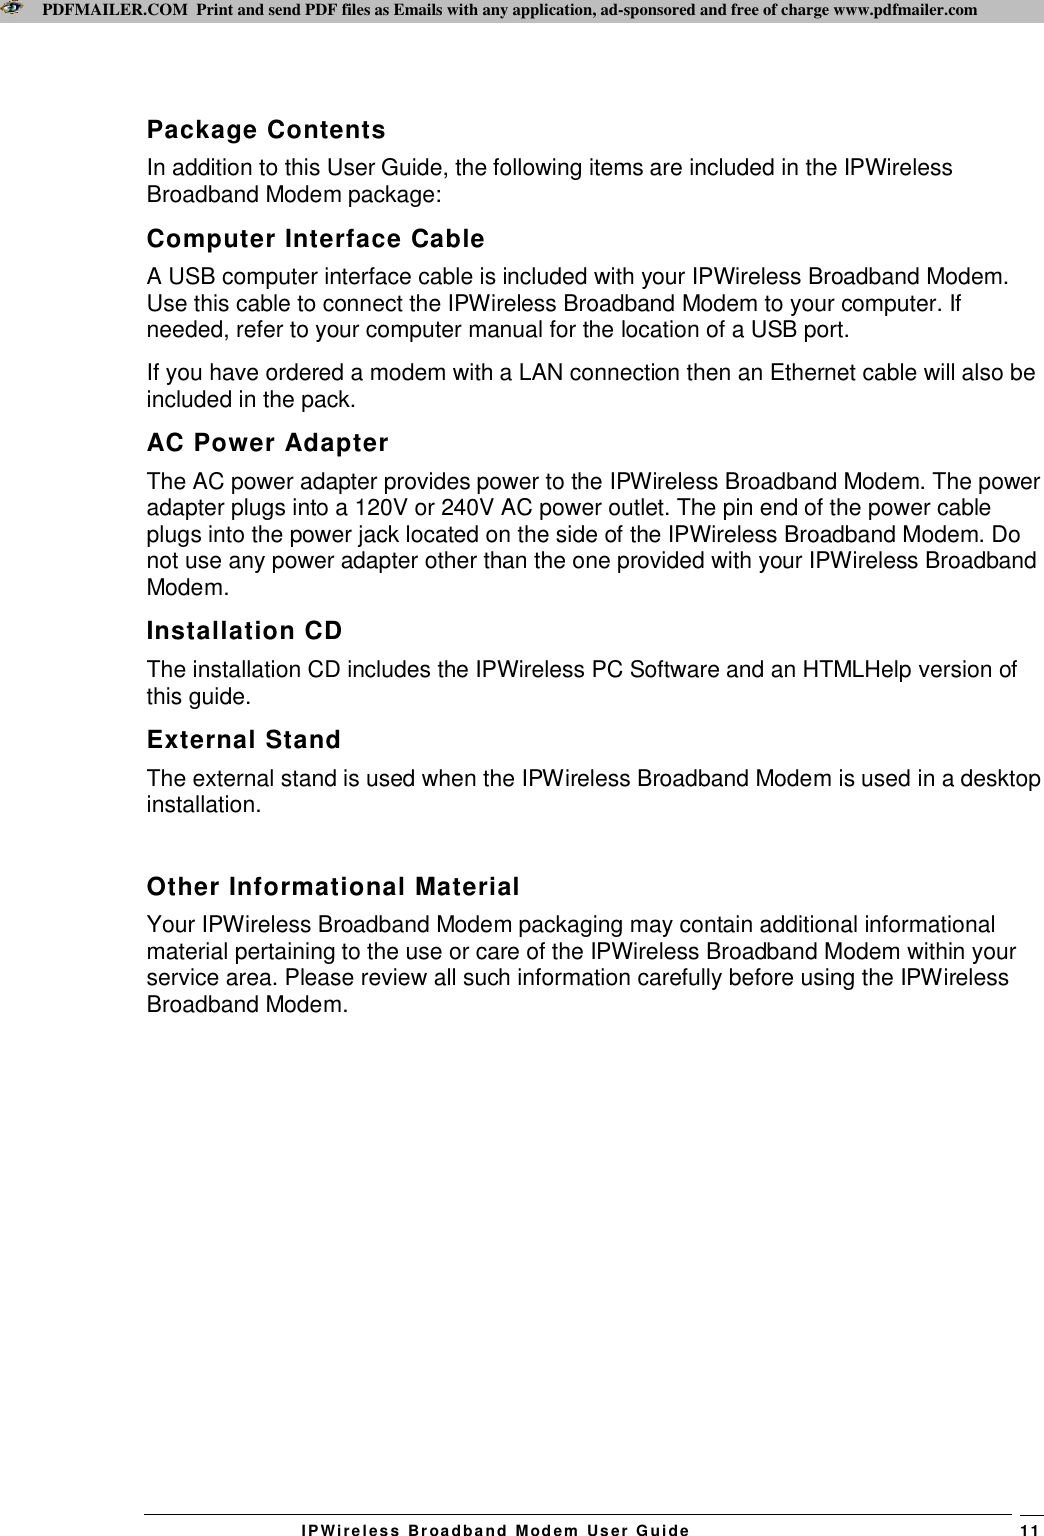 PDFMAILER.COM  Print and send PDF files as Emails with any application, ad-sponsored and free of charge www.pdfmailer.com  IPWireles s  Br oadba nd  Modem   User G uide    11 Package Contents In addition to this User Guide, the following items are included in the IPWireless Broadband Modem package: Computer Interface Cable A USB computer interface cable is included with your IPWireless Broadband Modem. Use this cable to connect the IPWireless Broadband Modem to your computer. If needed, refer to your computer manual for the location of a USB port.  If you have ordered a modem with a LAN connection then an Ethernet cable will also be included in the pack. AC Power Adapter The AC power adapter provides power to the IPWireless Broadband Modem. The power adapter plugs into a 120V or 240V AC power outlet. The pin end of the power cable plugs into the power jack located on the side of the IPWireless Broadband Modem. Do not use any power adapter other than the one provided with your IPWireless Broadband Modem.  Installation CD The installation CD includes the IPWireless PC Software and an HTMLHelp version of this guide. External Stand The external stand is used when the IPWireless Broadband Modem is used in a desktop installation.  Other Informational Material Your IPWireless Broadband Modem packaging may contain additional informational material pertaining to the use or care of the IPWireless Broadband Modem within your service area. Please review all such information carefully before using the IPWireless Broadband Modem. 